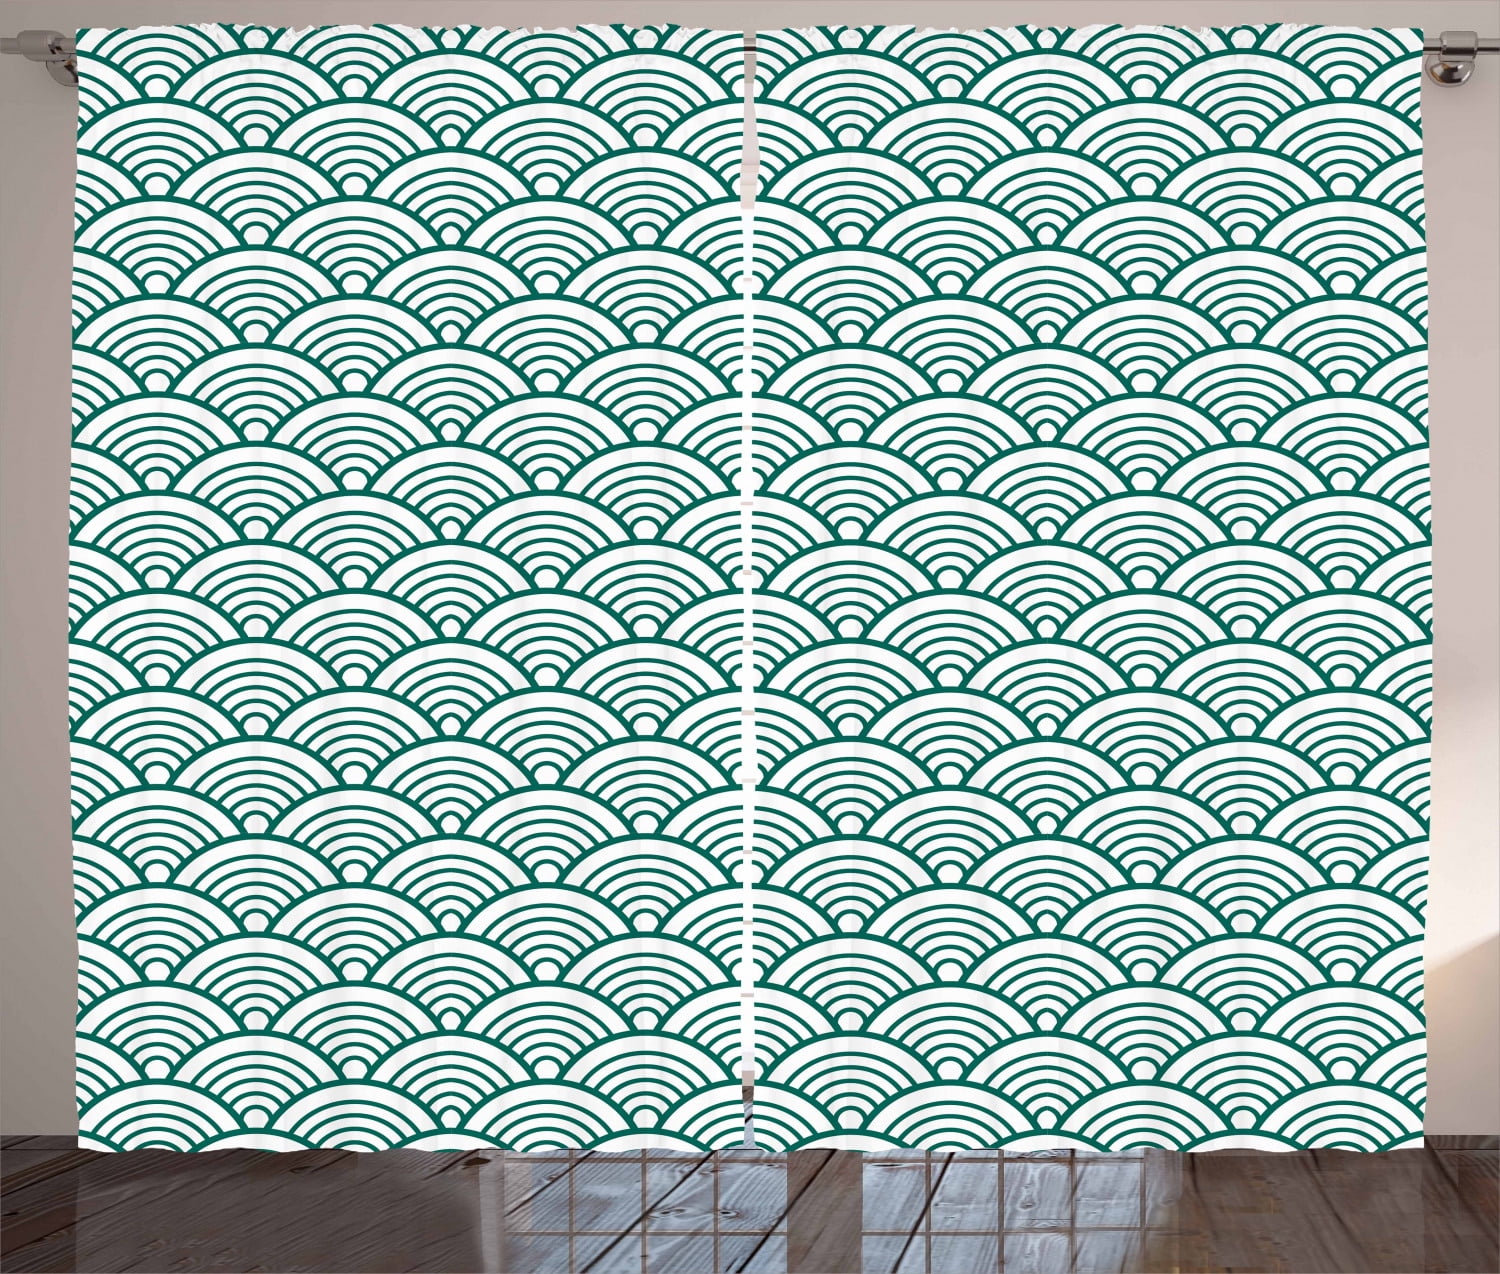 55 W X 39 L Inches Traditional Japanese Chinese Seigaiha Pattern Abstract Scales Asian Inspirations Window Drapes 2 Panel Set for Kitchen Cafe Jade White Ambesonne Teal Kitchen Curtains